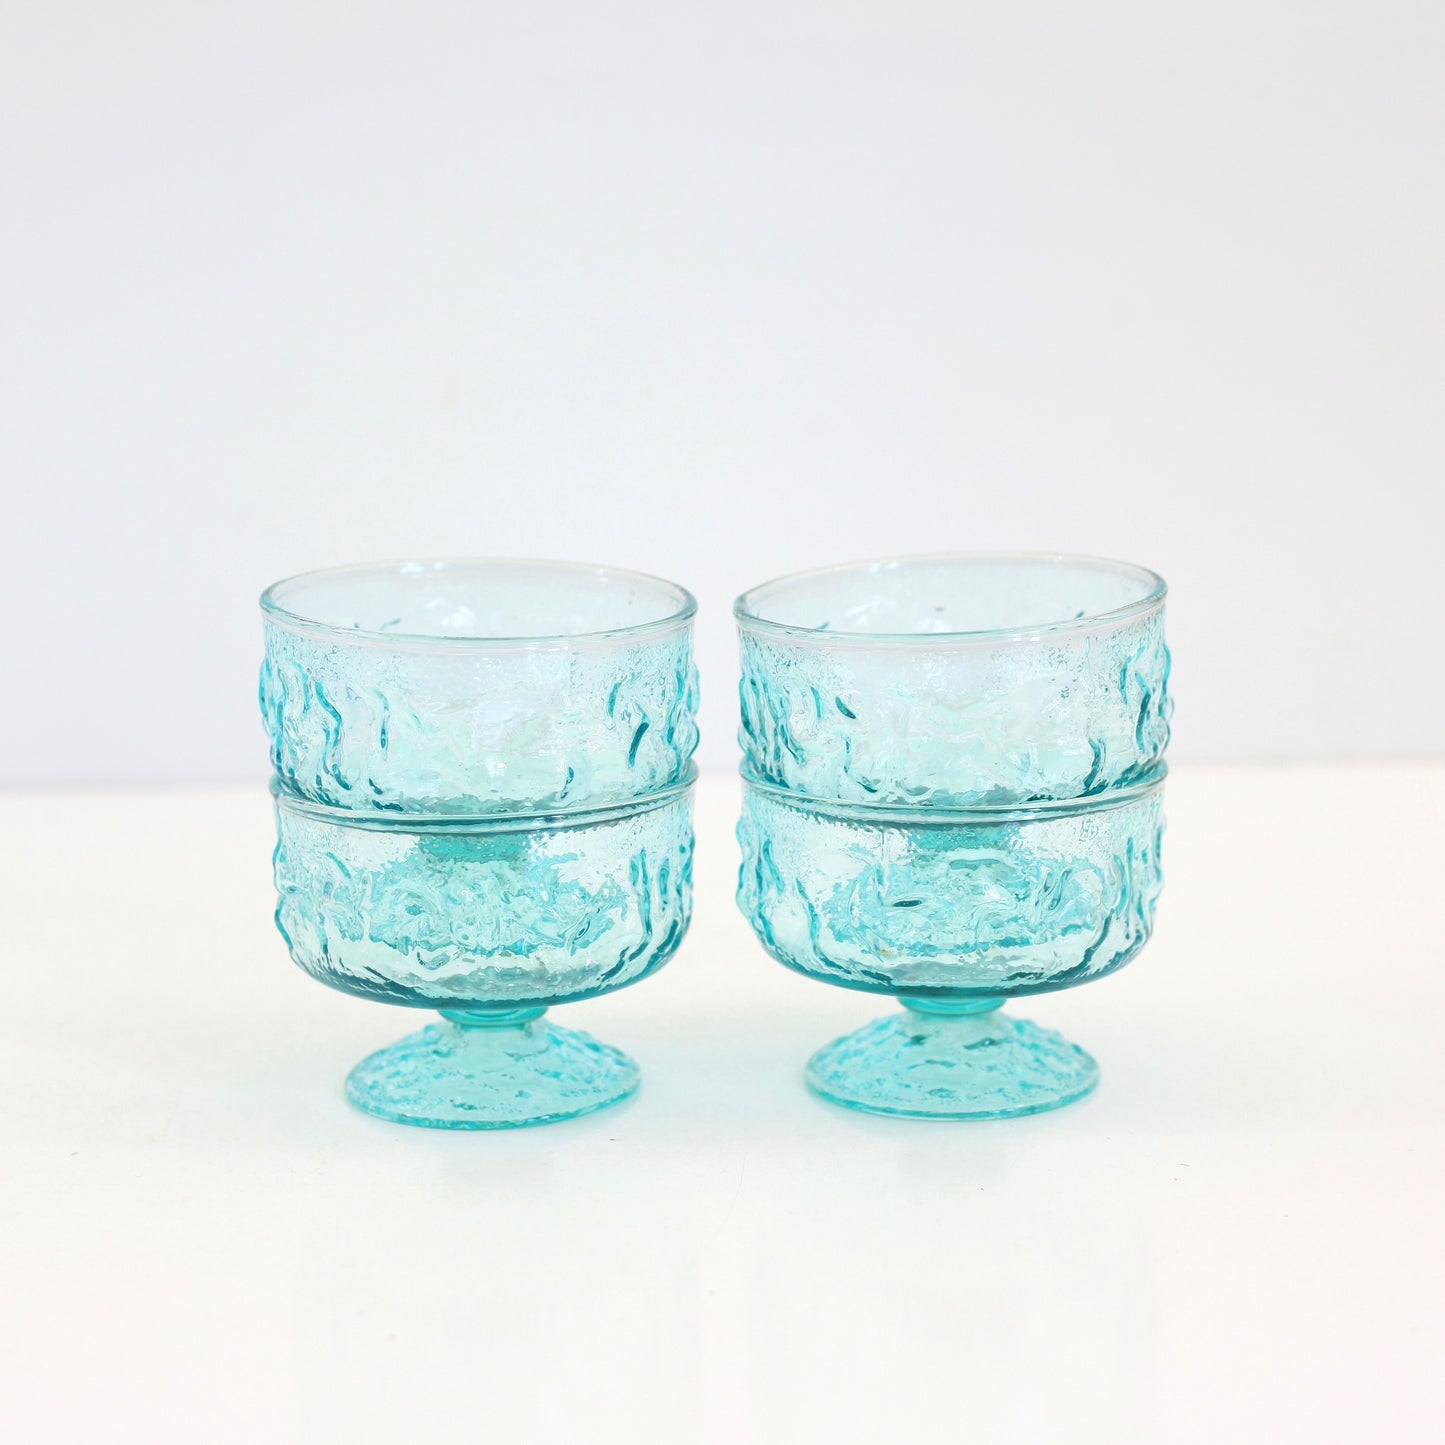 SOLD - Mid Century Aqua Lido Sherbet Dishes by Anchor Hocking